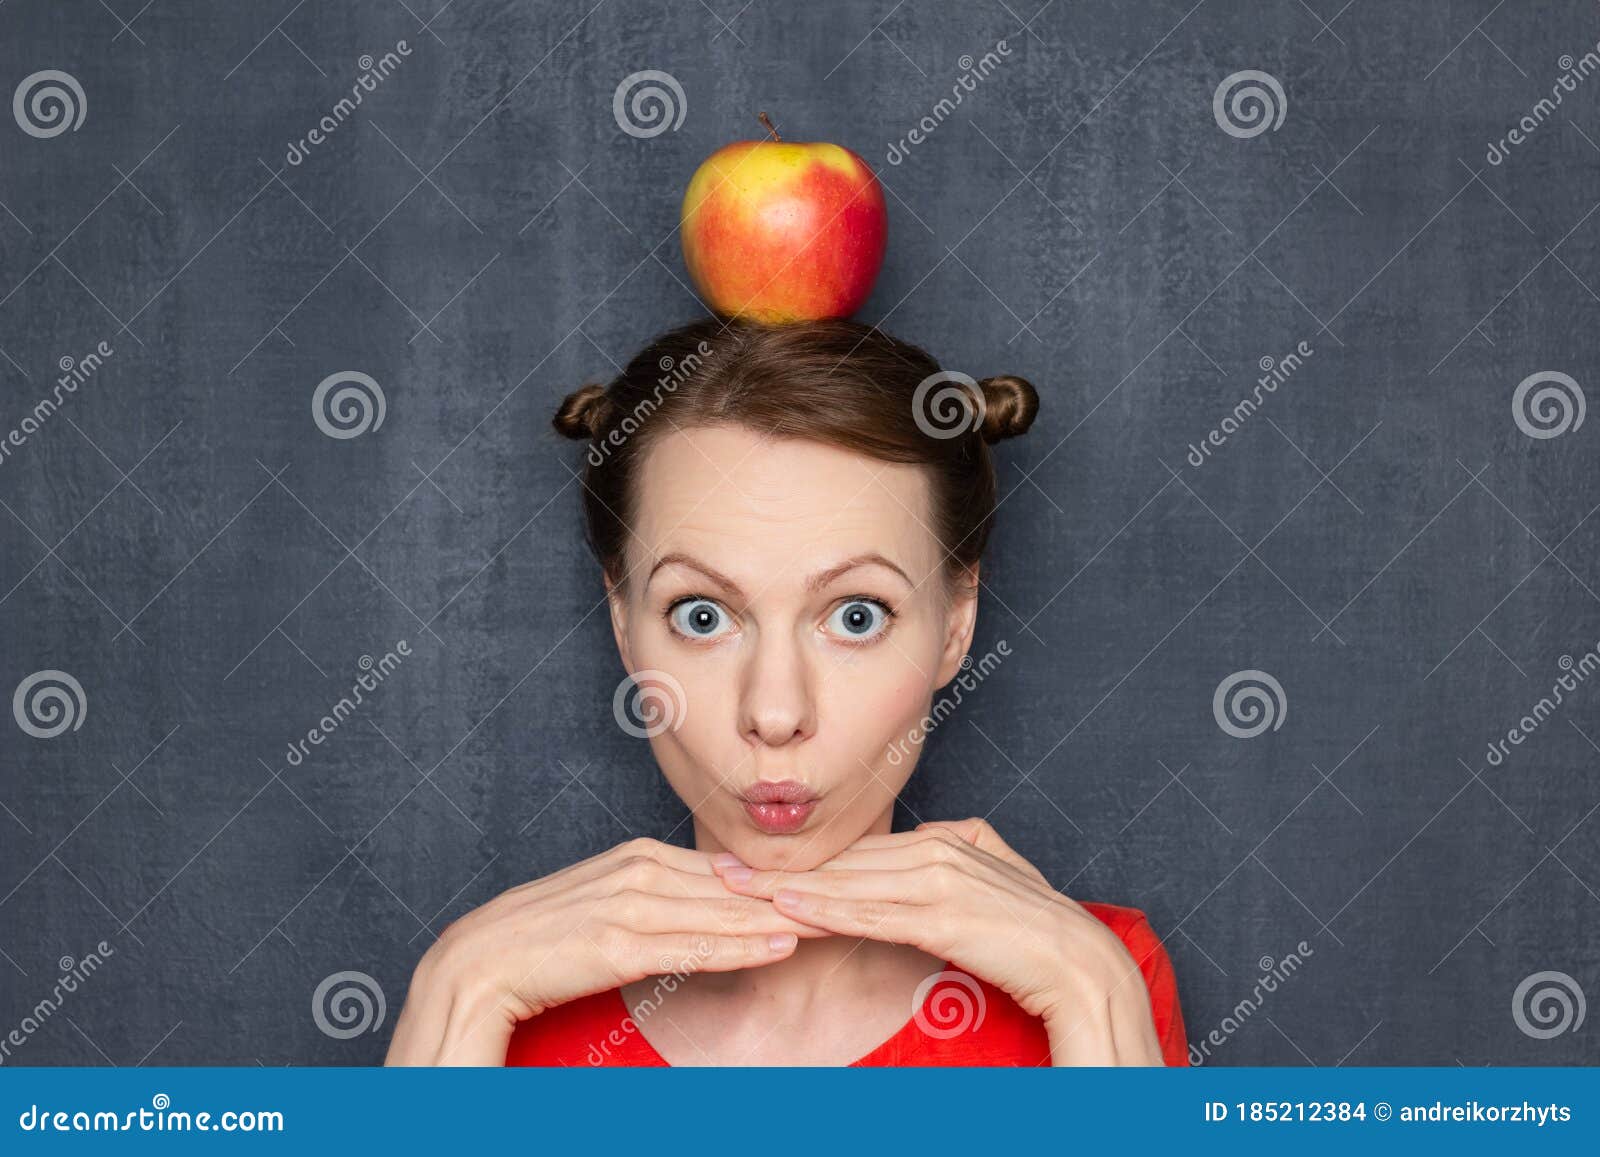 Portrait of Cute Surprised Girl with Apple on Head Stock Photo - Image of  diet, blond: 185212384